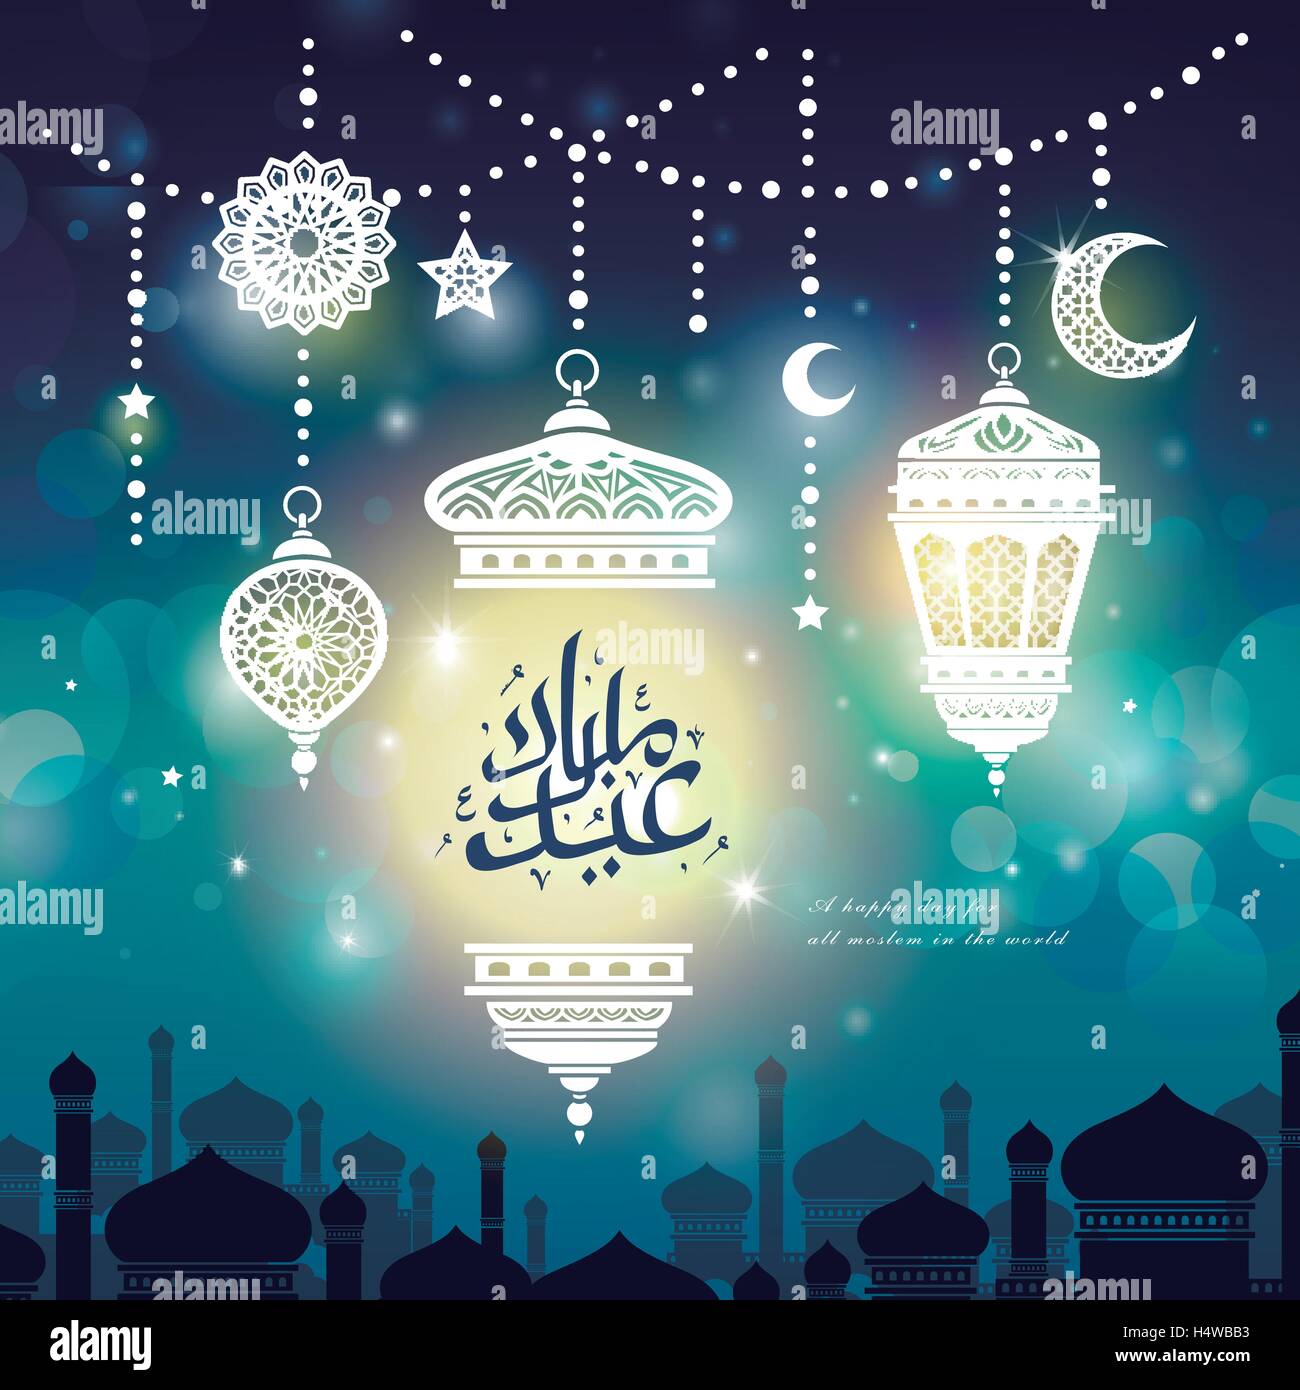 Eid Mubarak calligraphy design with mosque and light 